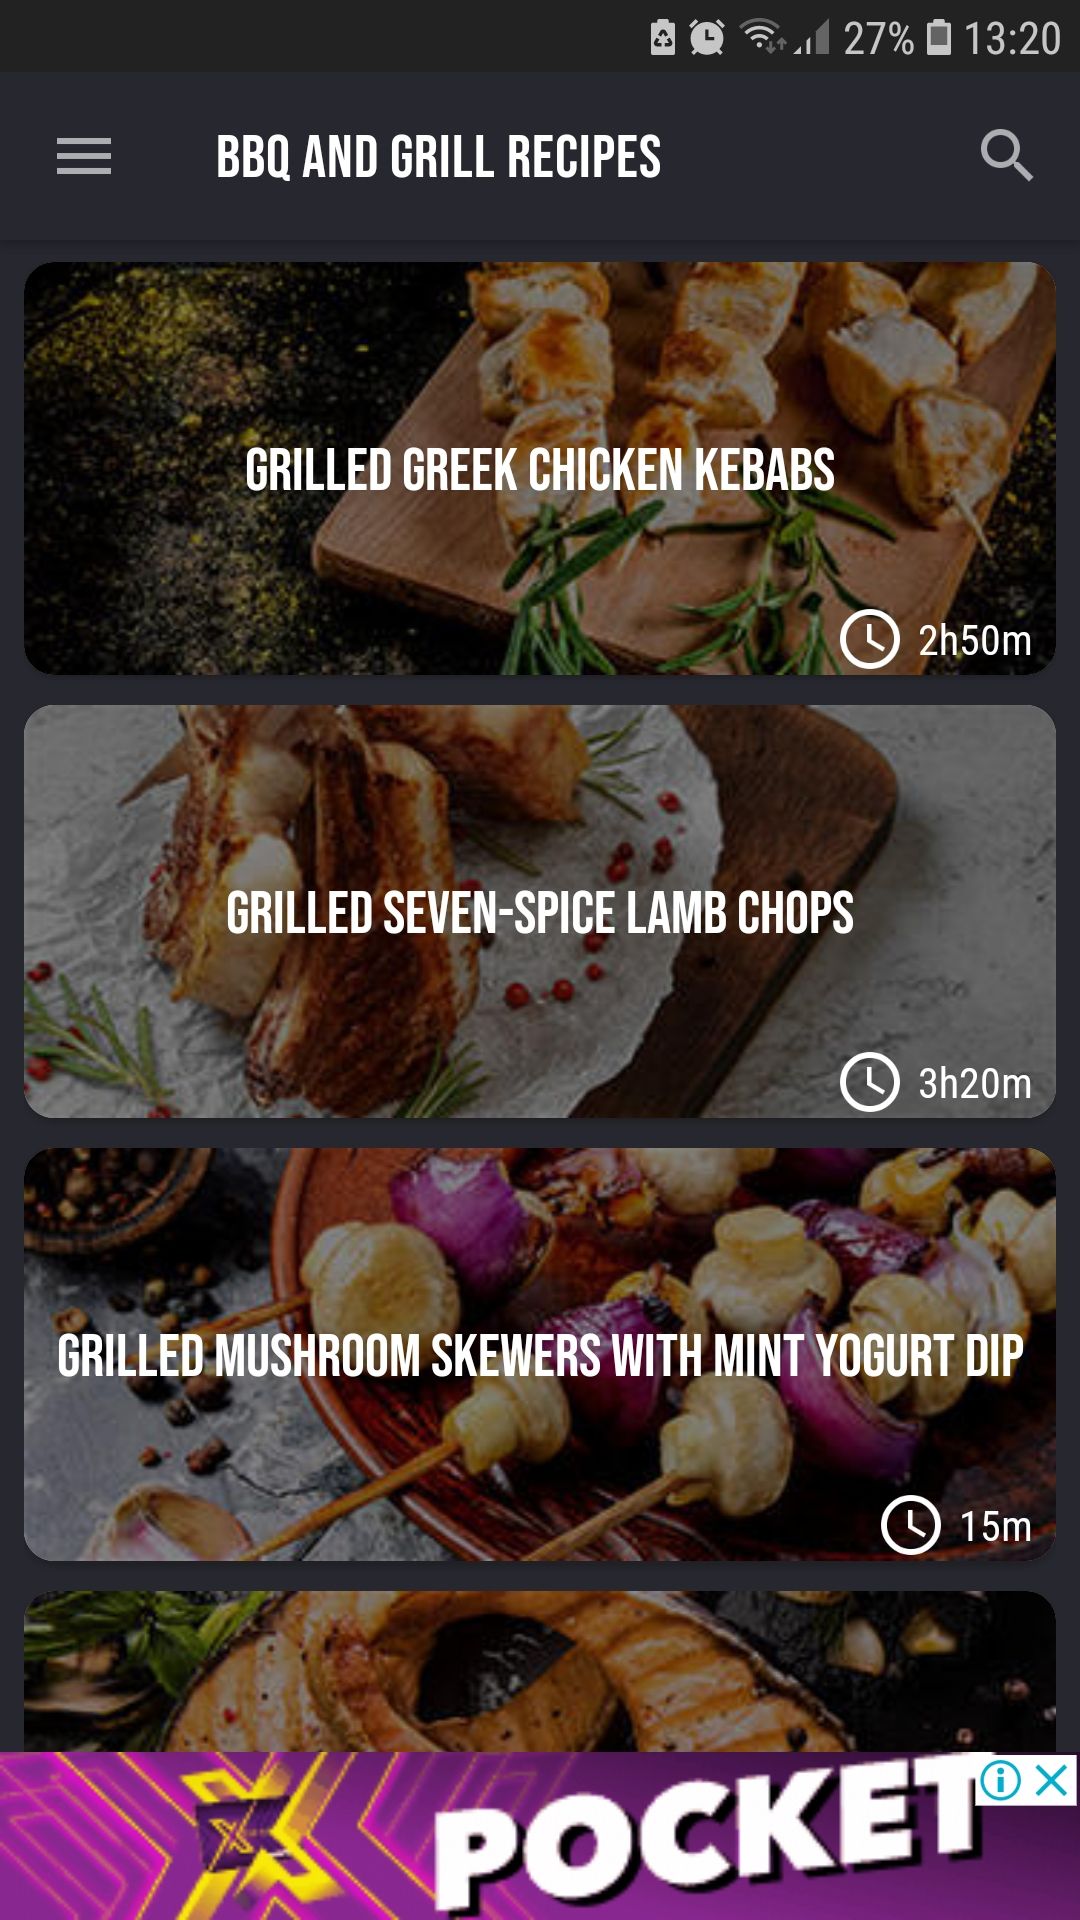 BBQ and Grill Recipes mobile recipe app